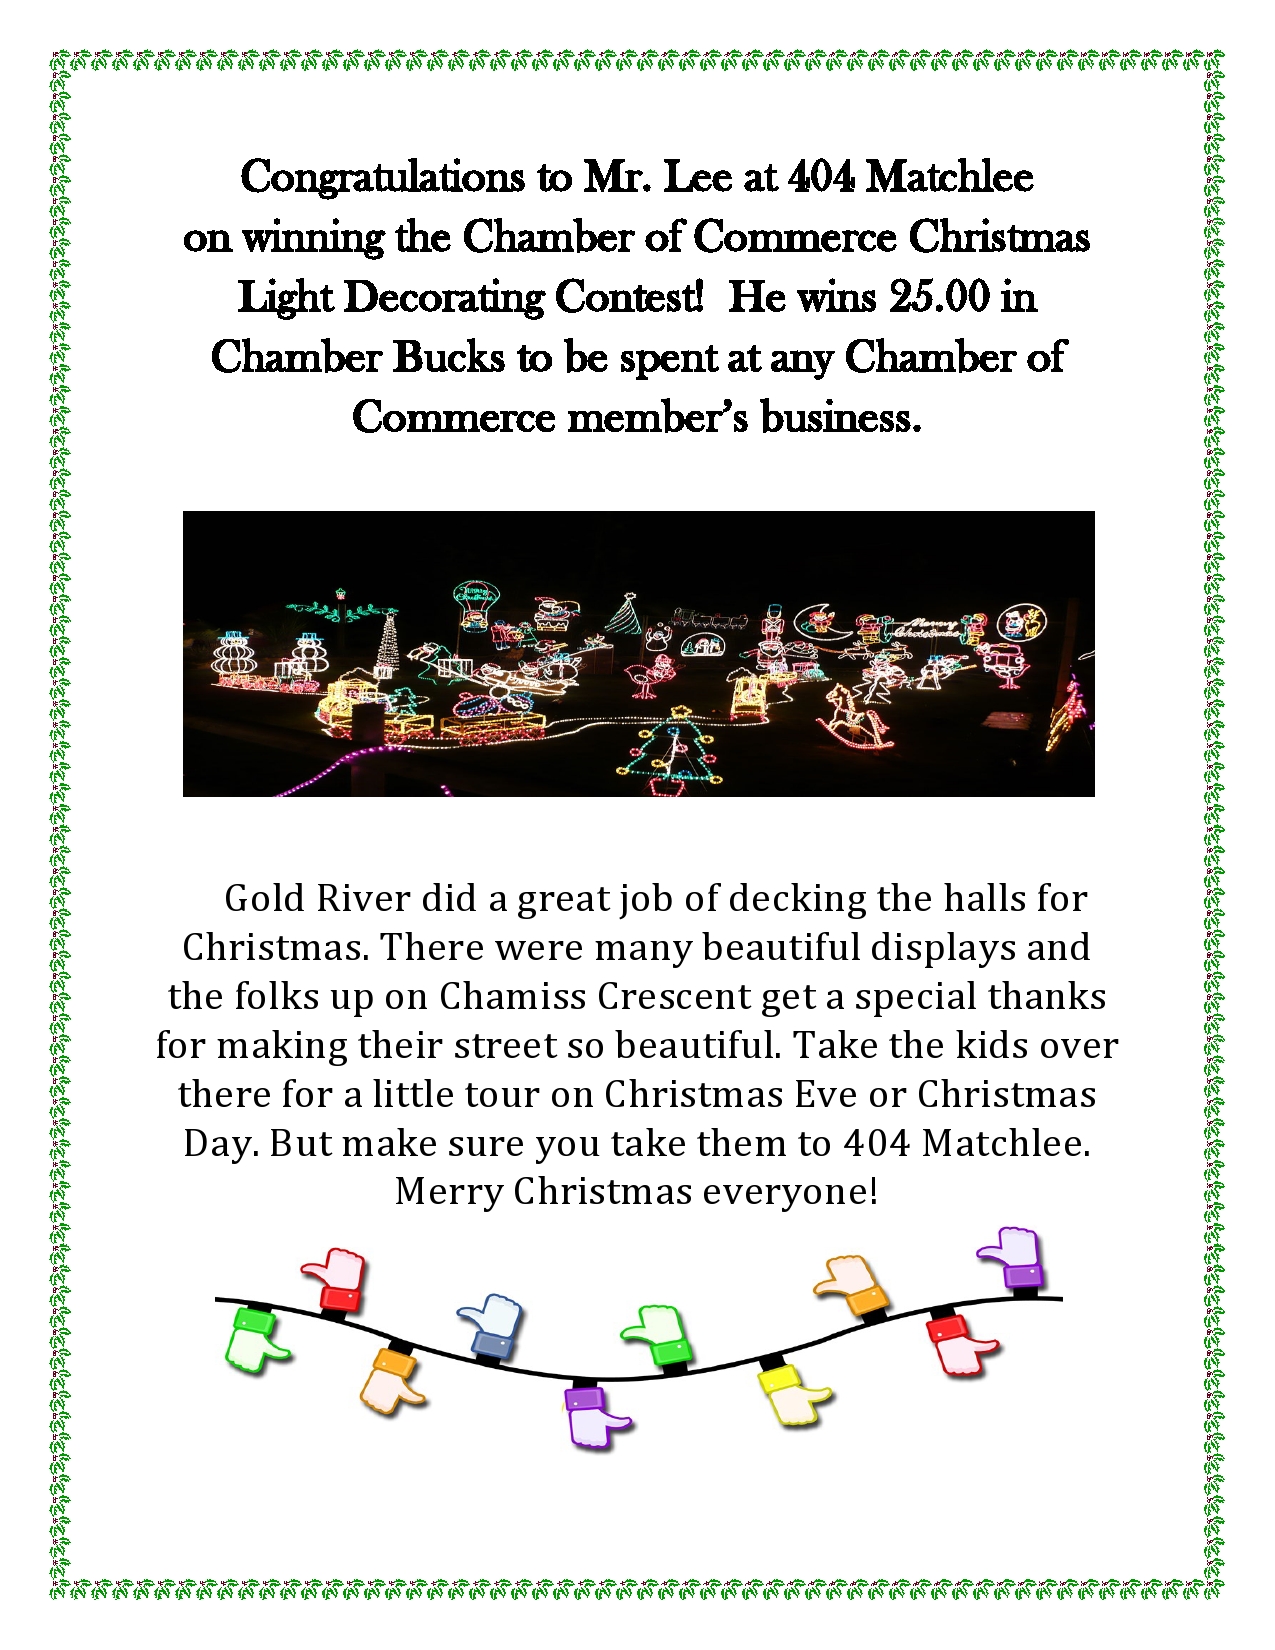 the-12-days-of-christmas-lights-decorating-contest-winner-page0001